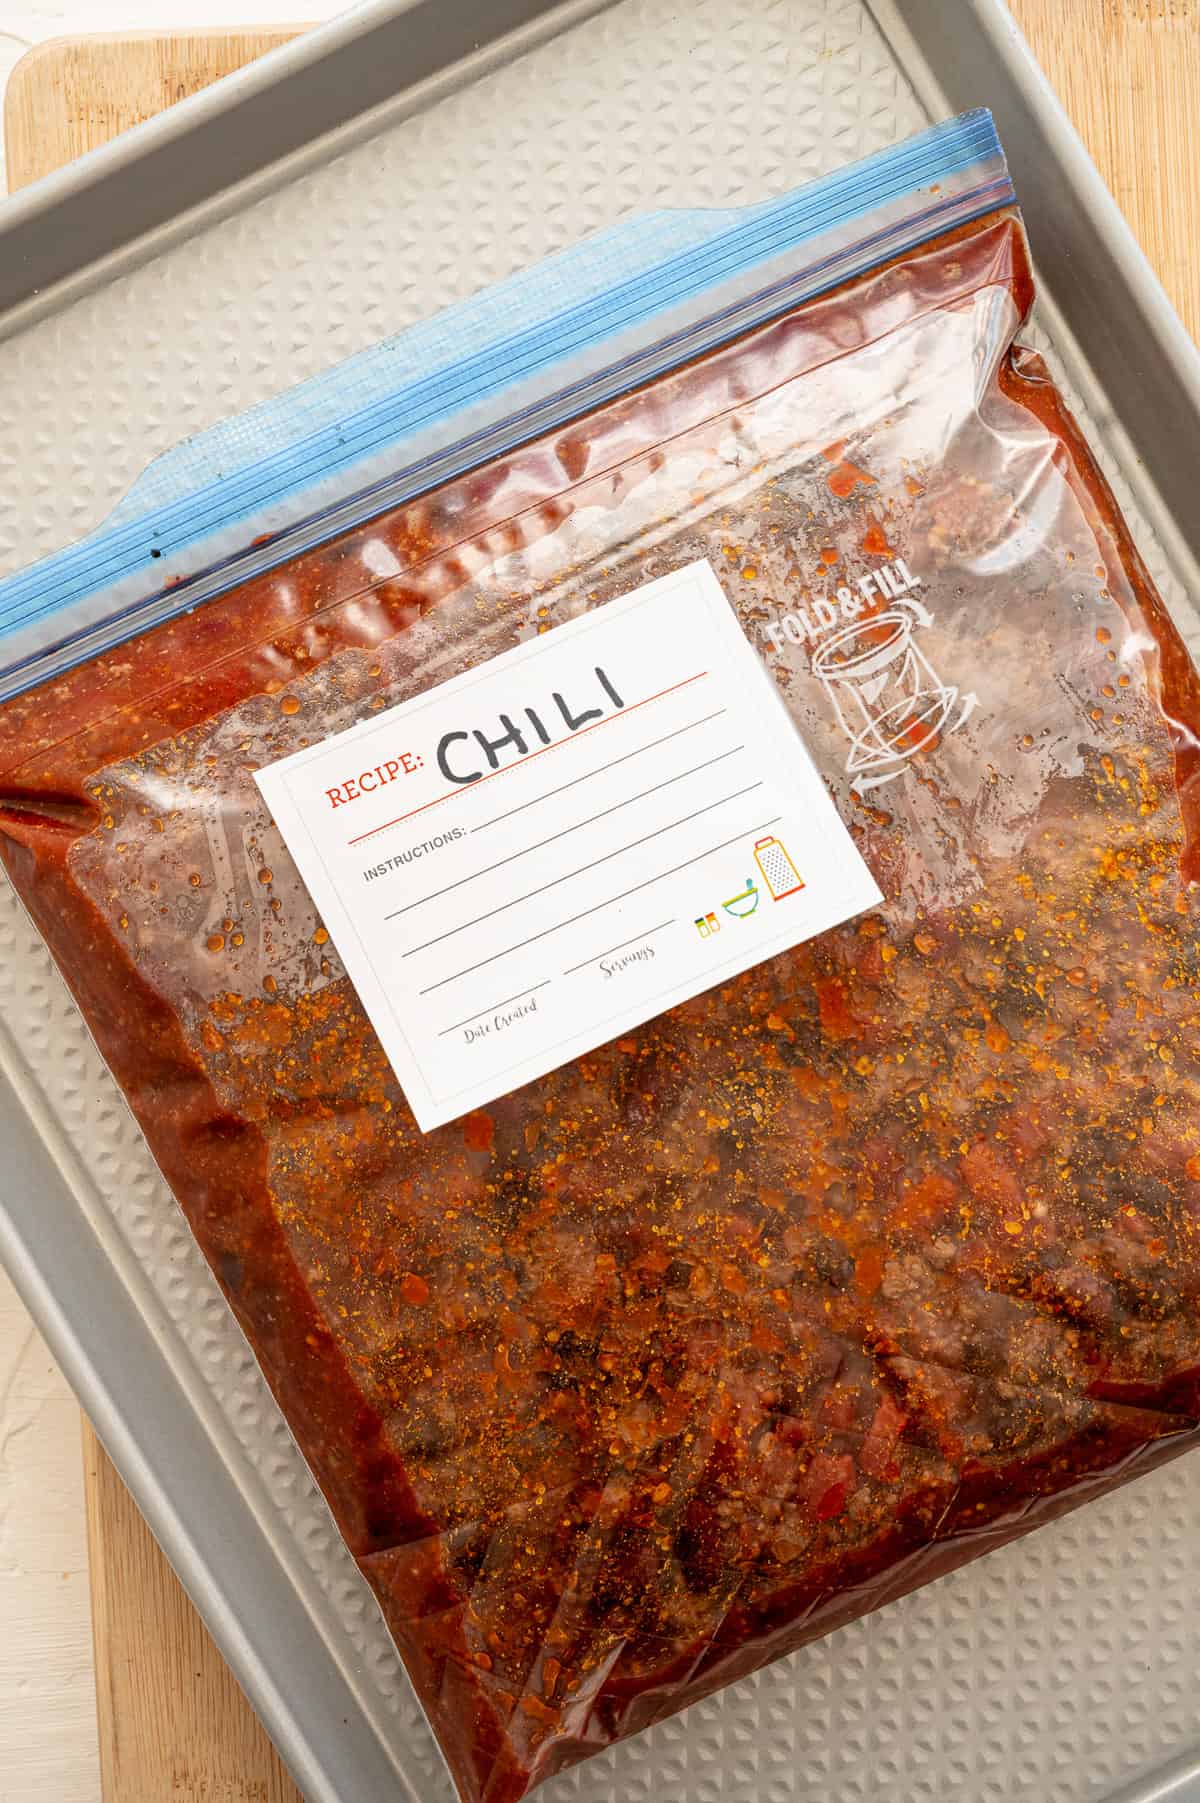 Chili prepped as a freezer meal in a ziplock bag with a label.